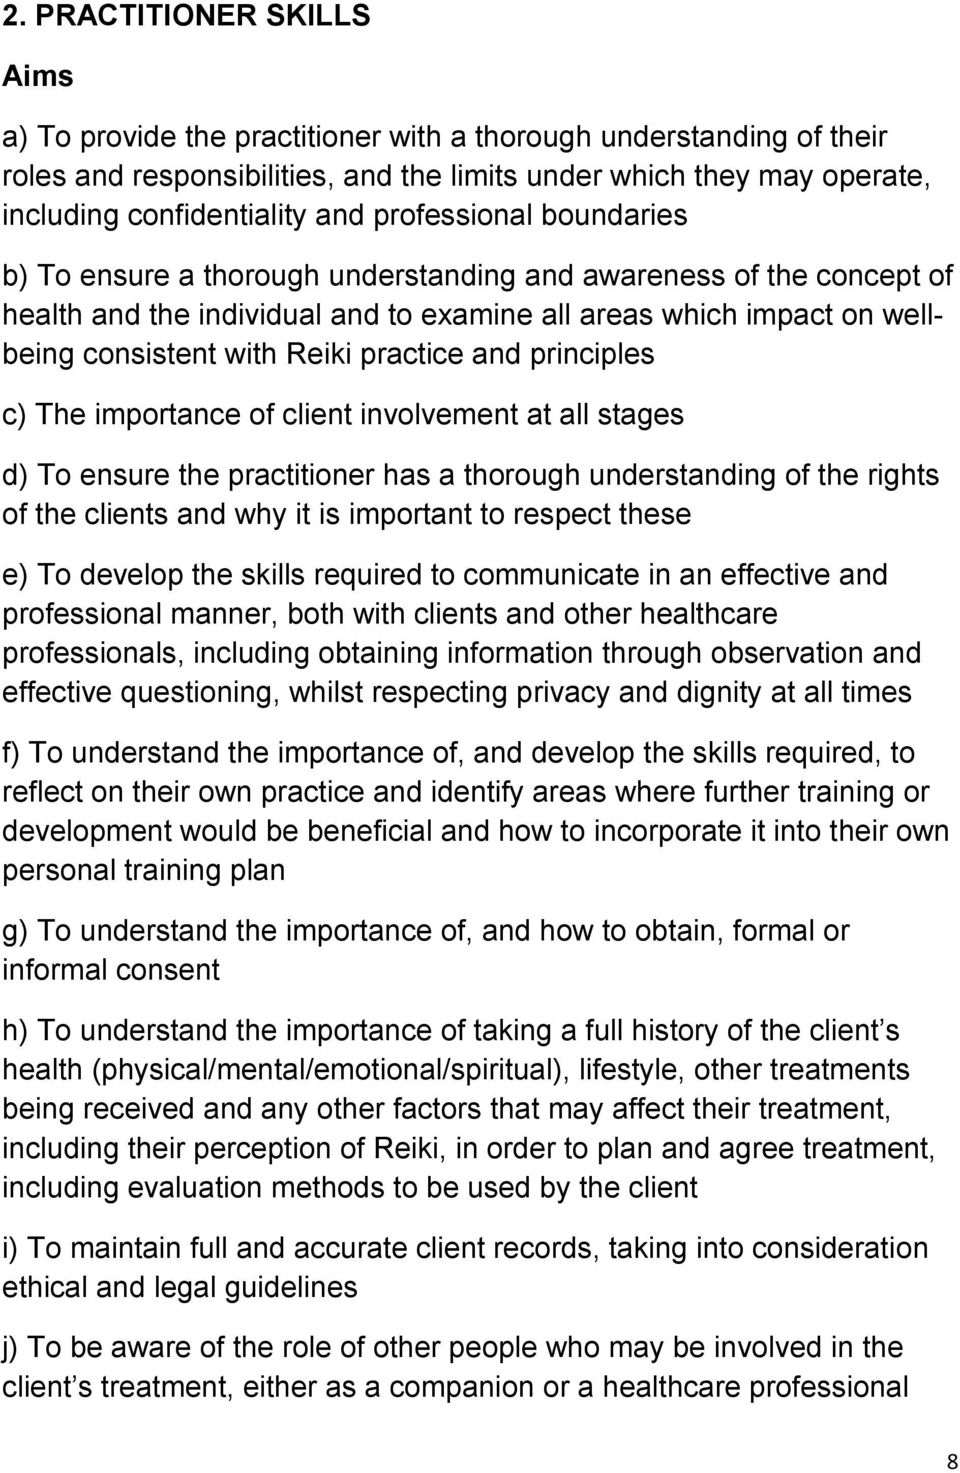 practice and principles c) The importance of client involvement at all stages d) To ensure the practitioner has a thorough understanding of the rights of the clients and why it is important to